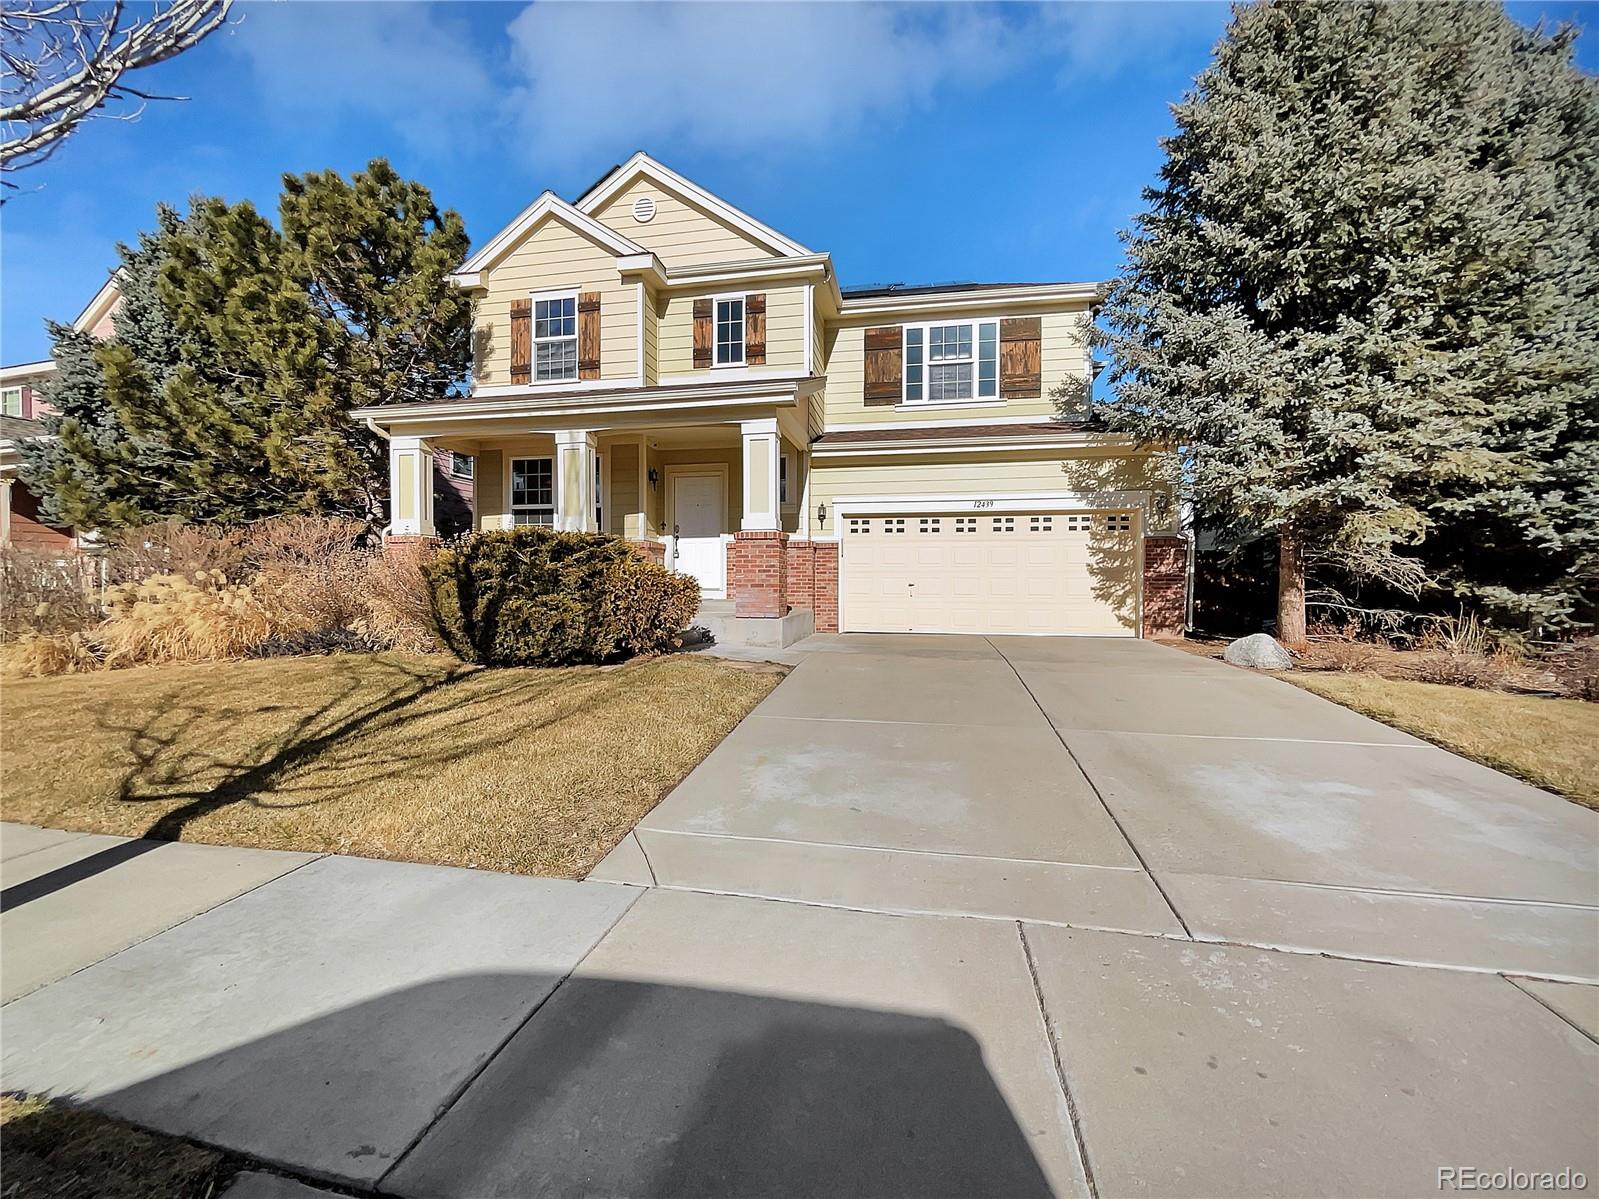 12439 E 106th Way, commerce city MLS: 6500264 Beds: 4 Baths: 4 Price: $606,000